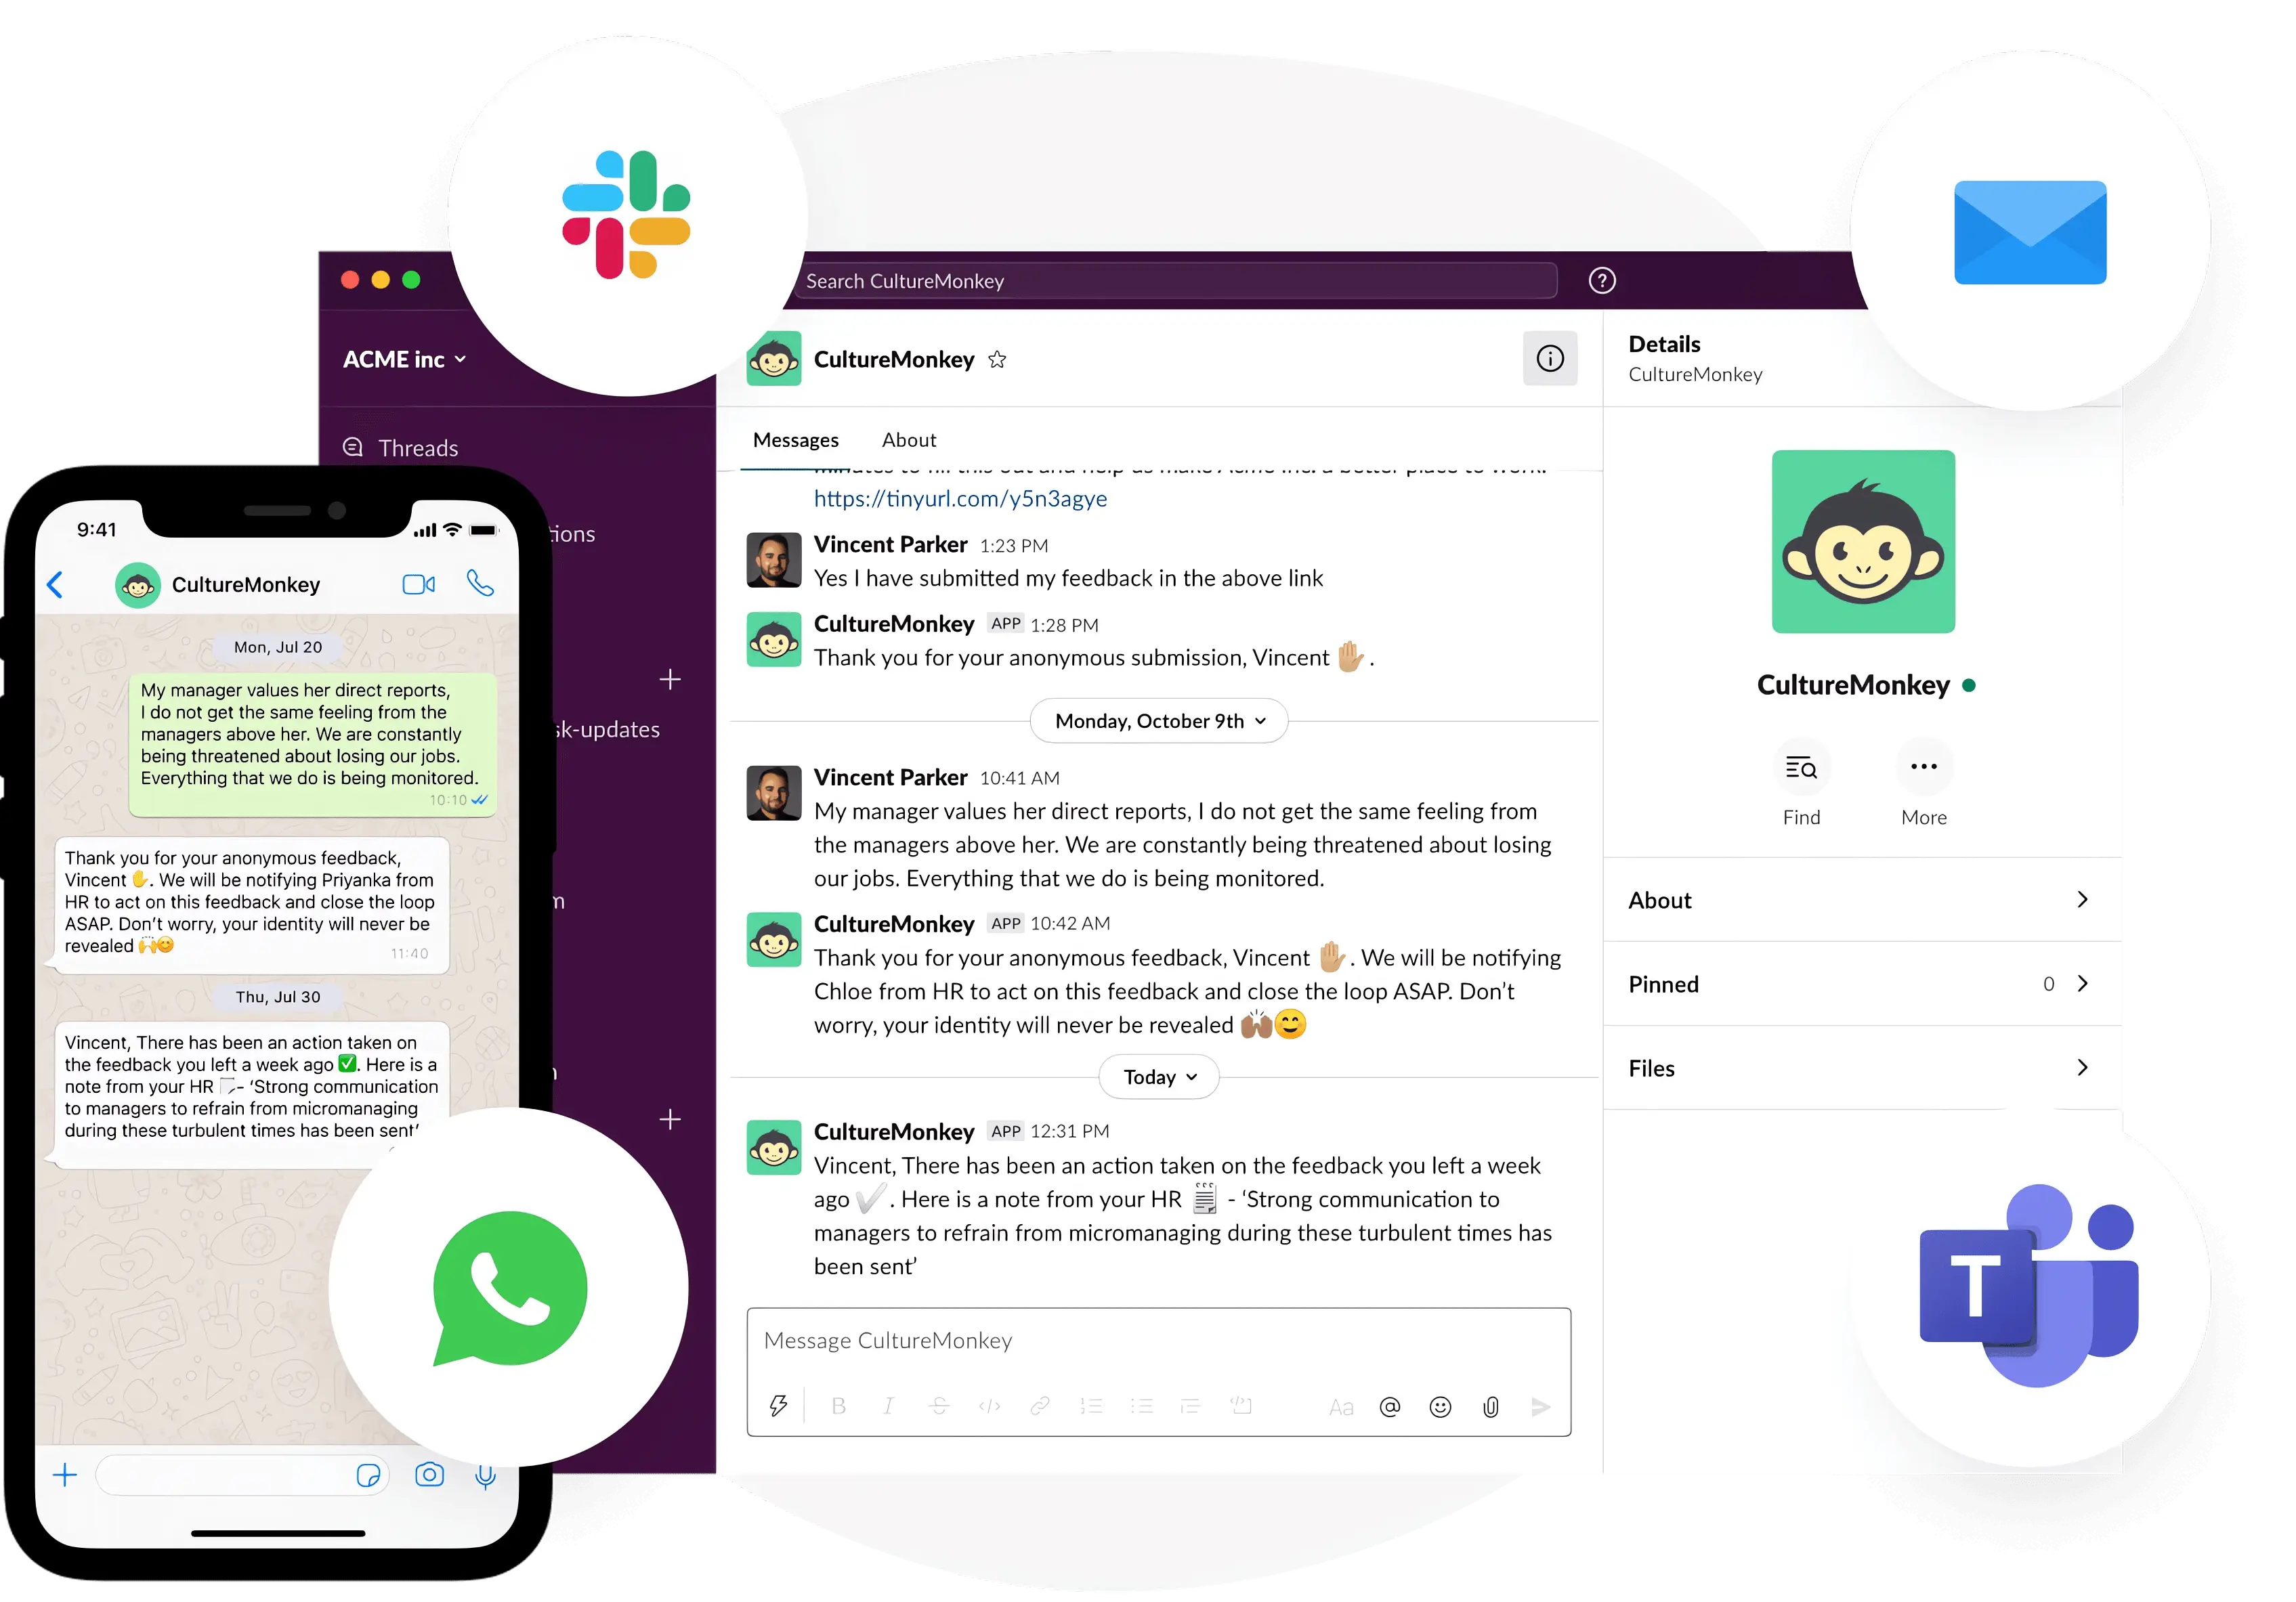 Enhance employee feedback participation rates with popular social channels like WhatsApp, Teams, and Slack.